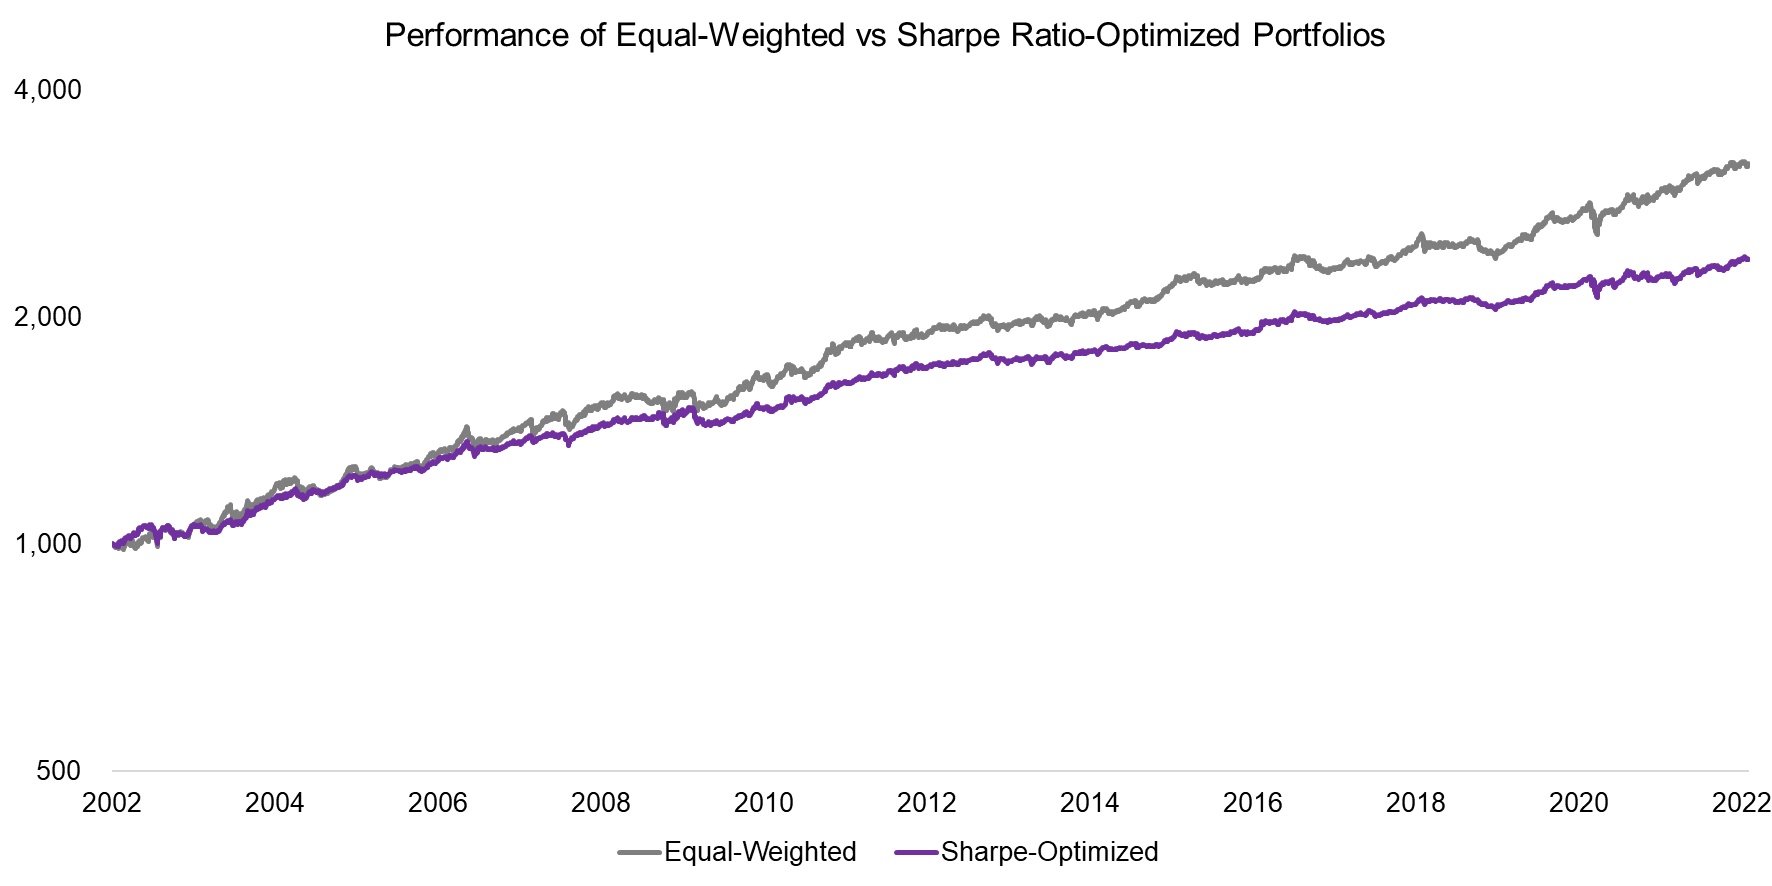 Performance of Equal-Weighted vs Sharpe Ratio-Optimized Portfolios